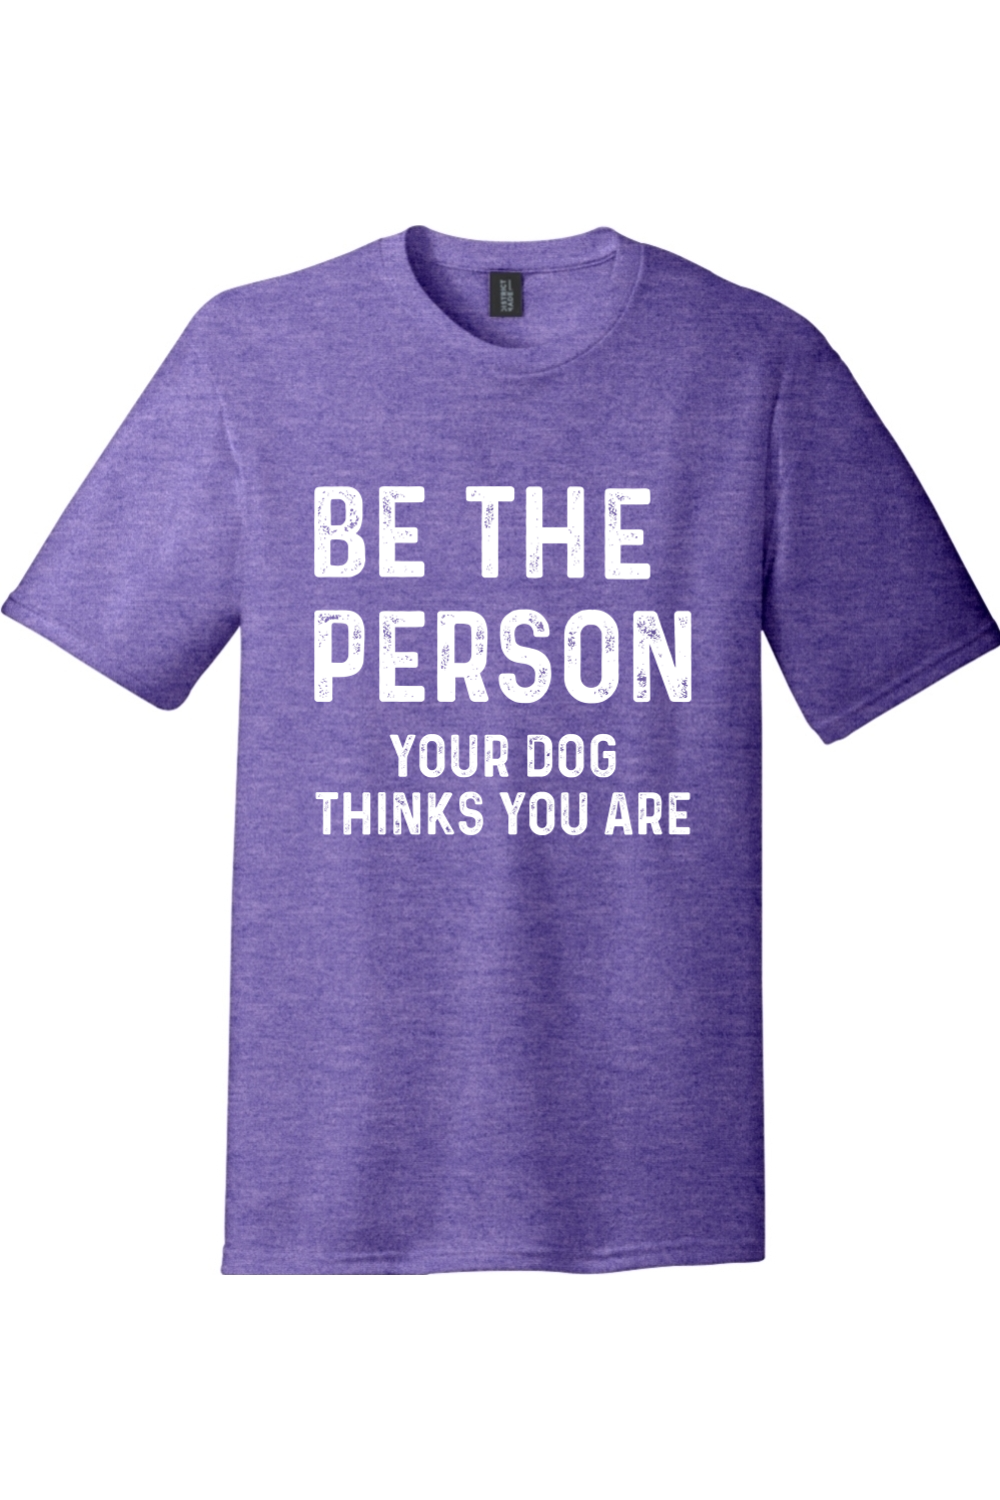 Be the Person Your Dog Thinks You Are | Premium Tri-Blend T-Shirt